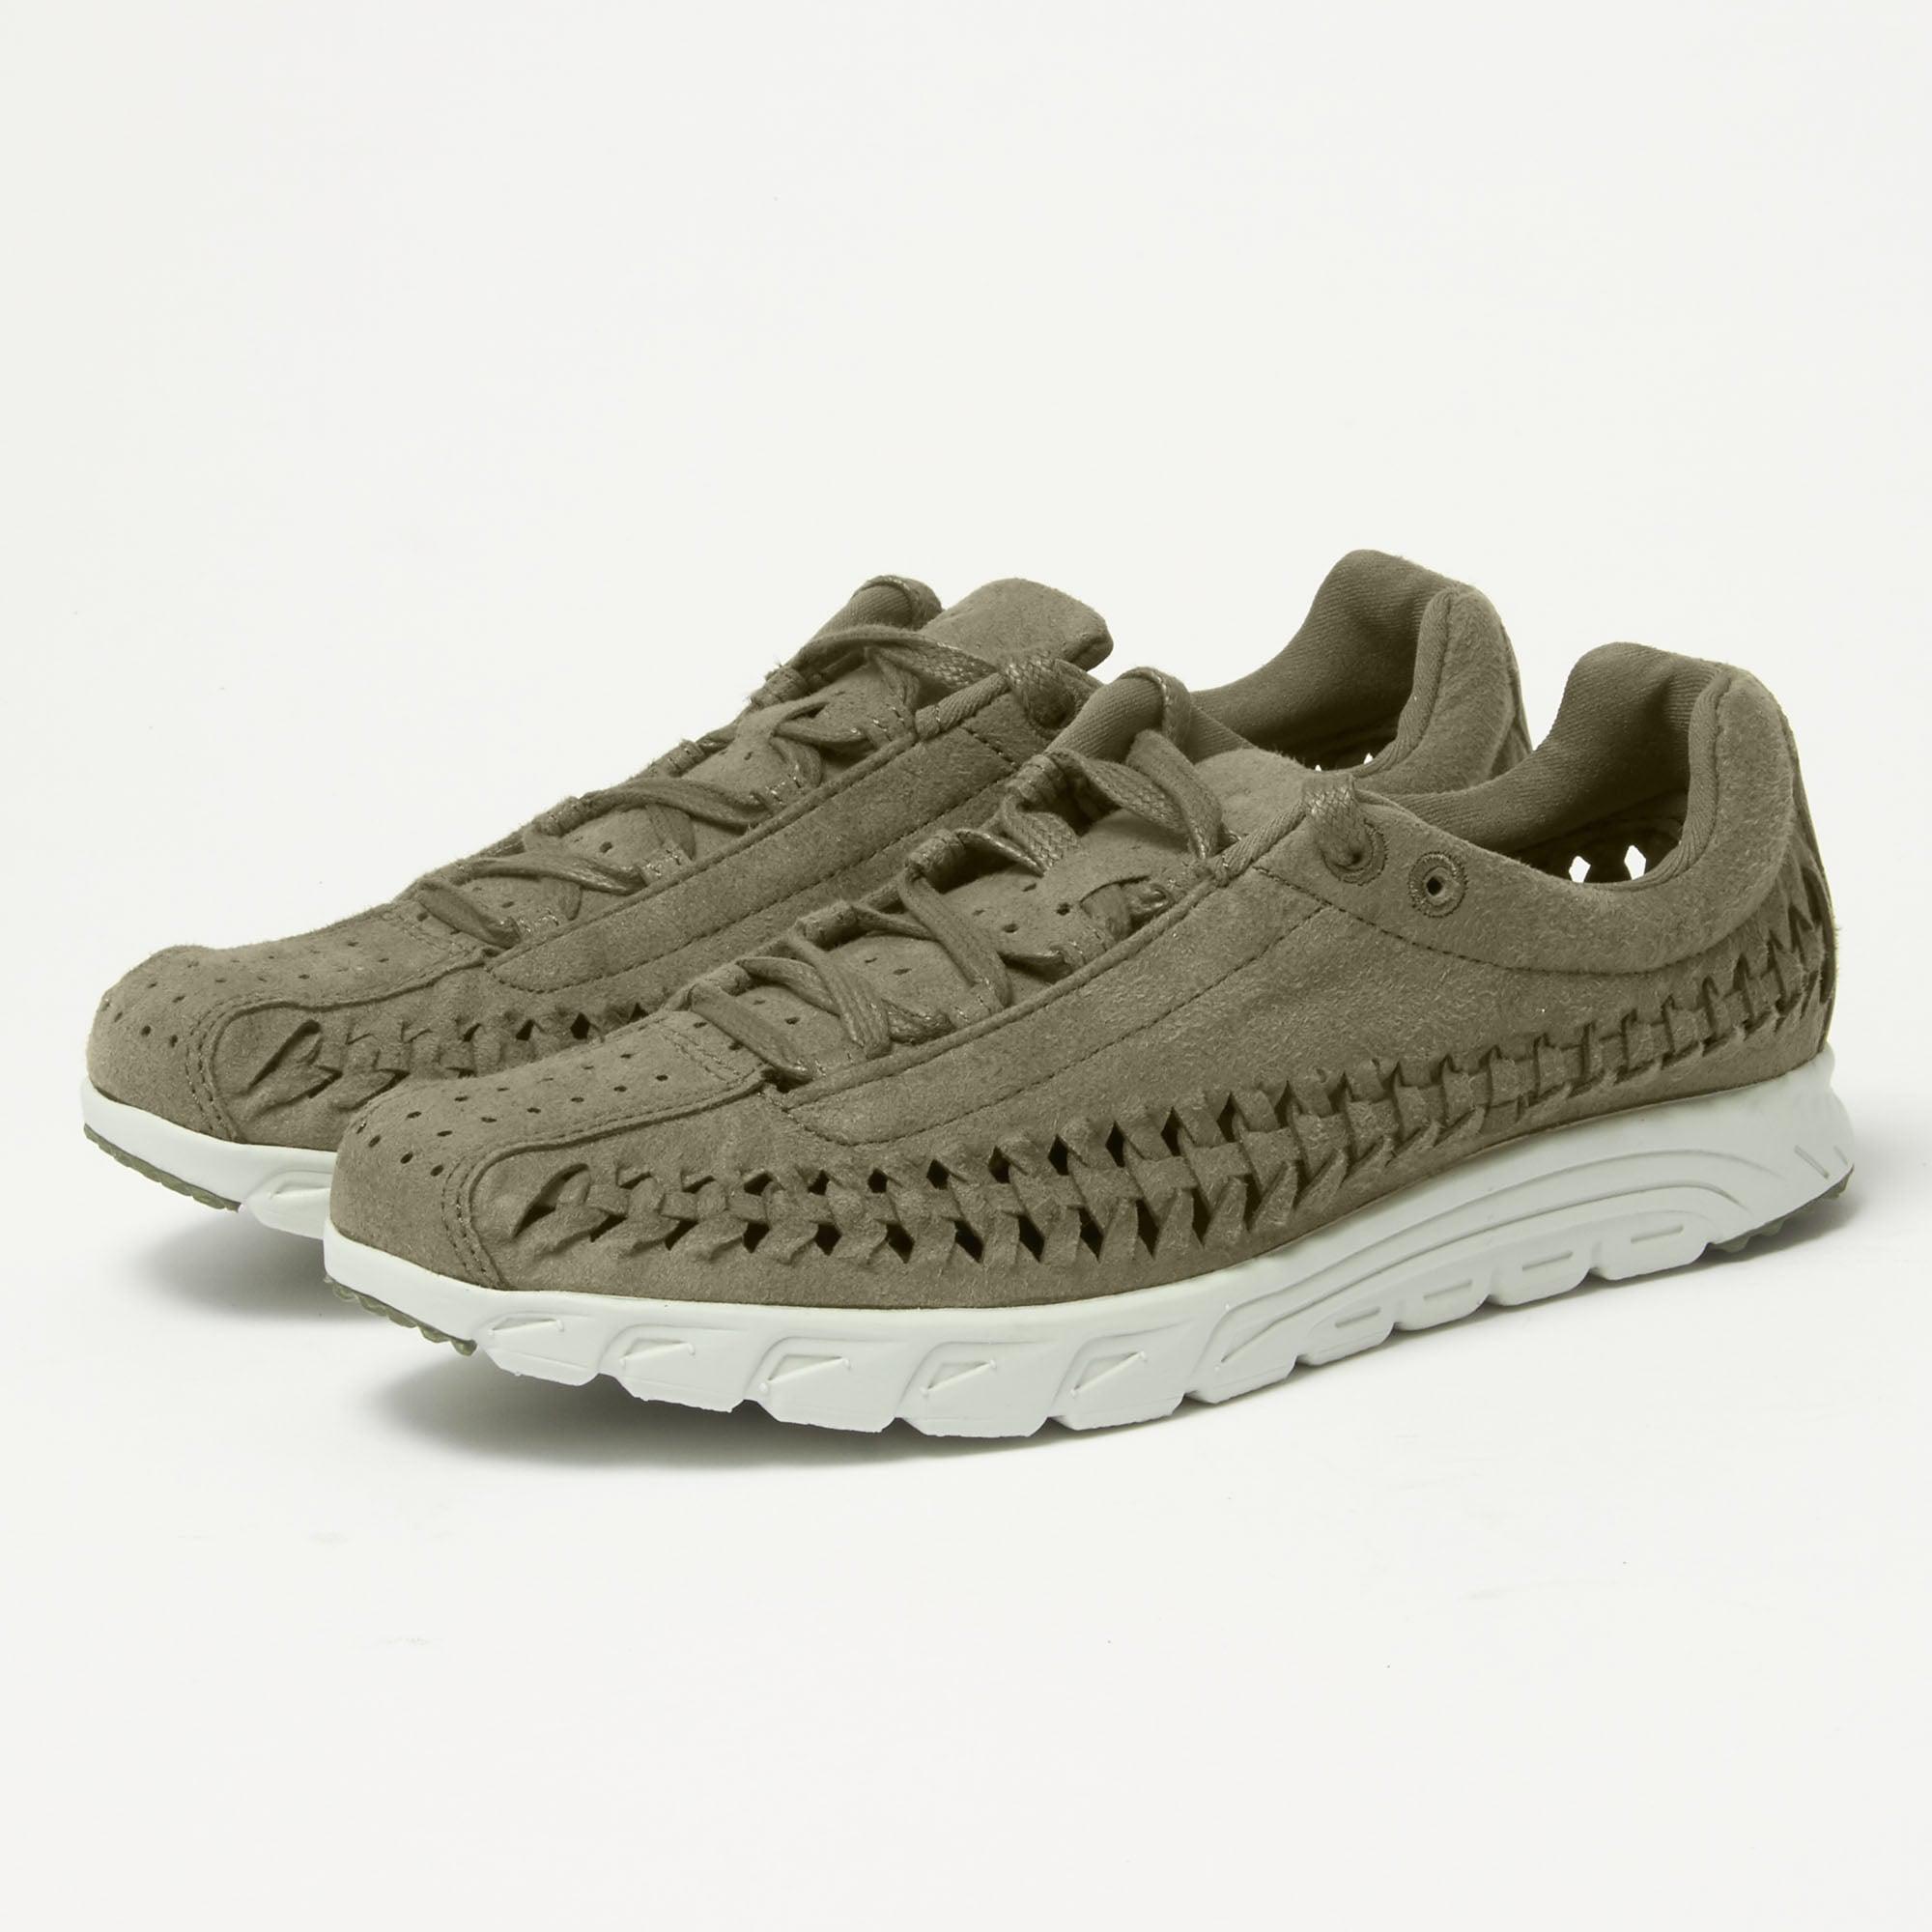 Nike Suede Mayfly Woven - Olive in Green - Lyst